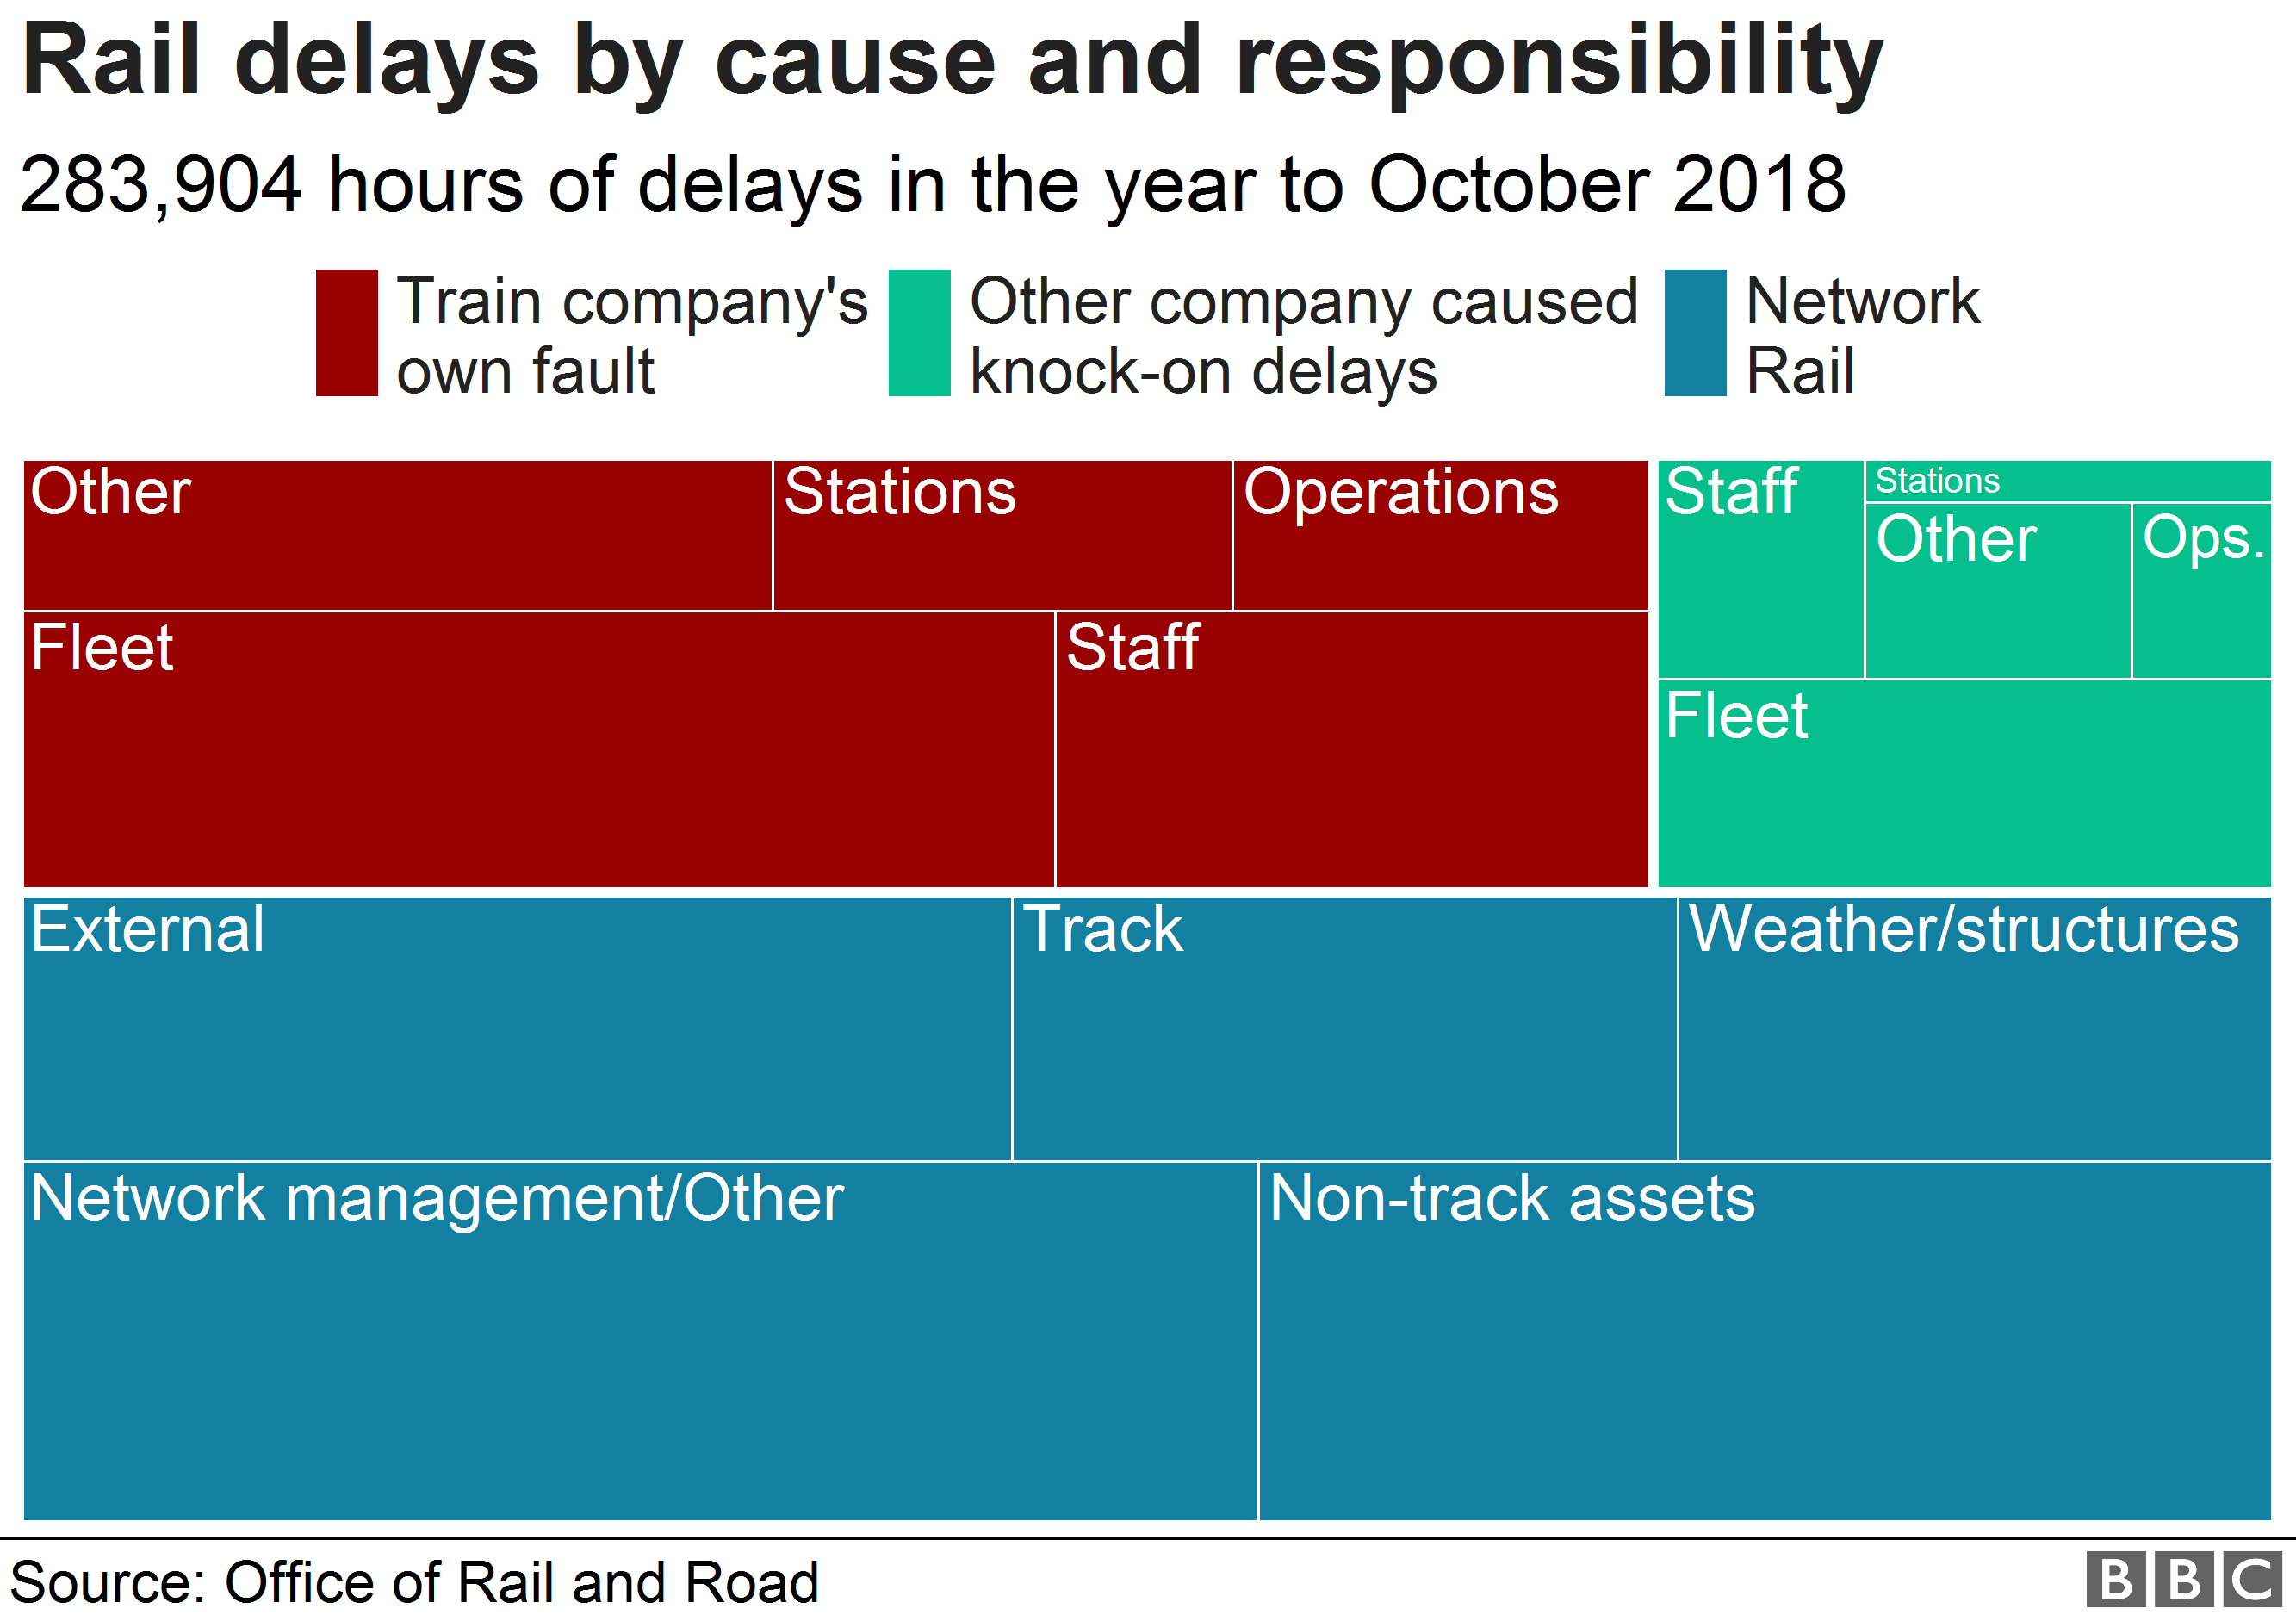 Chart showing reason for delays